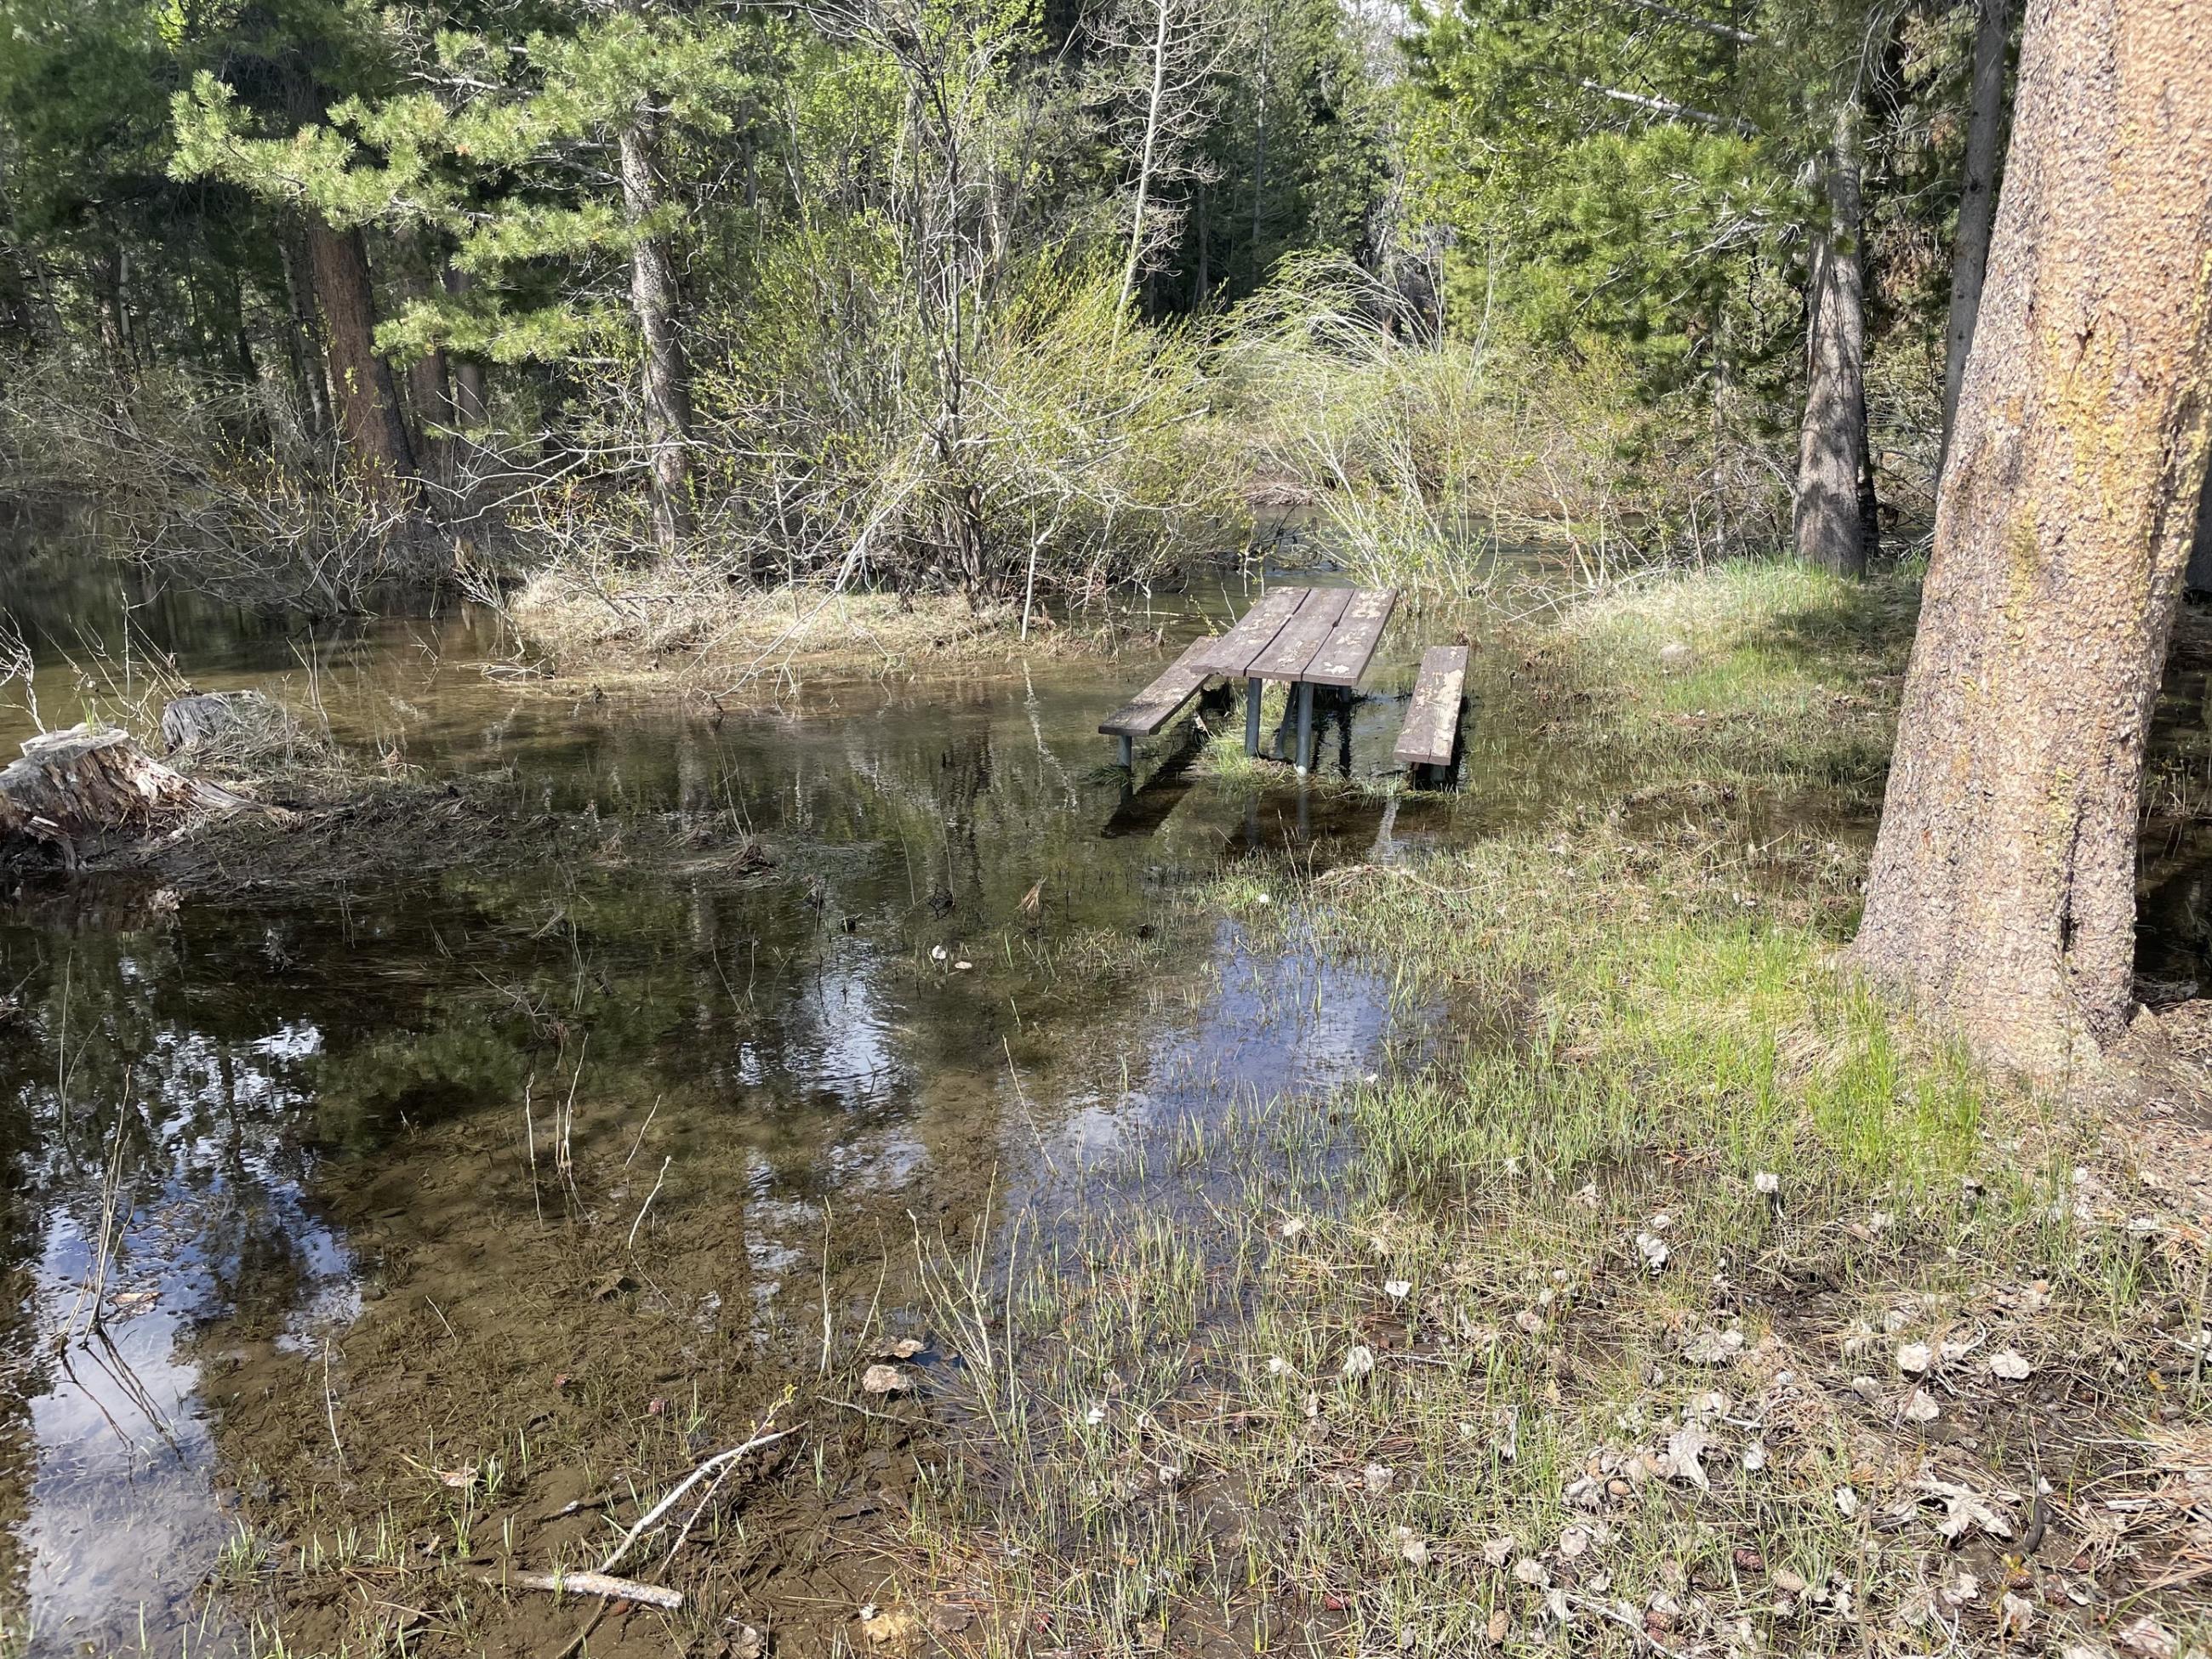 Image showing flooding in camping site 7 of the Moraine Campground on the Mono Lake Ranger District